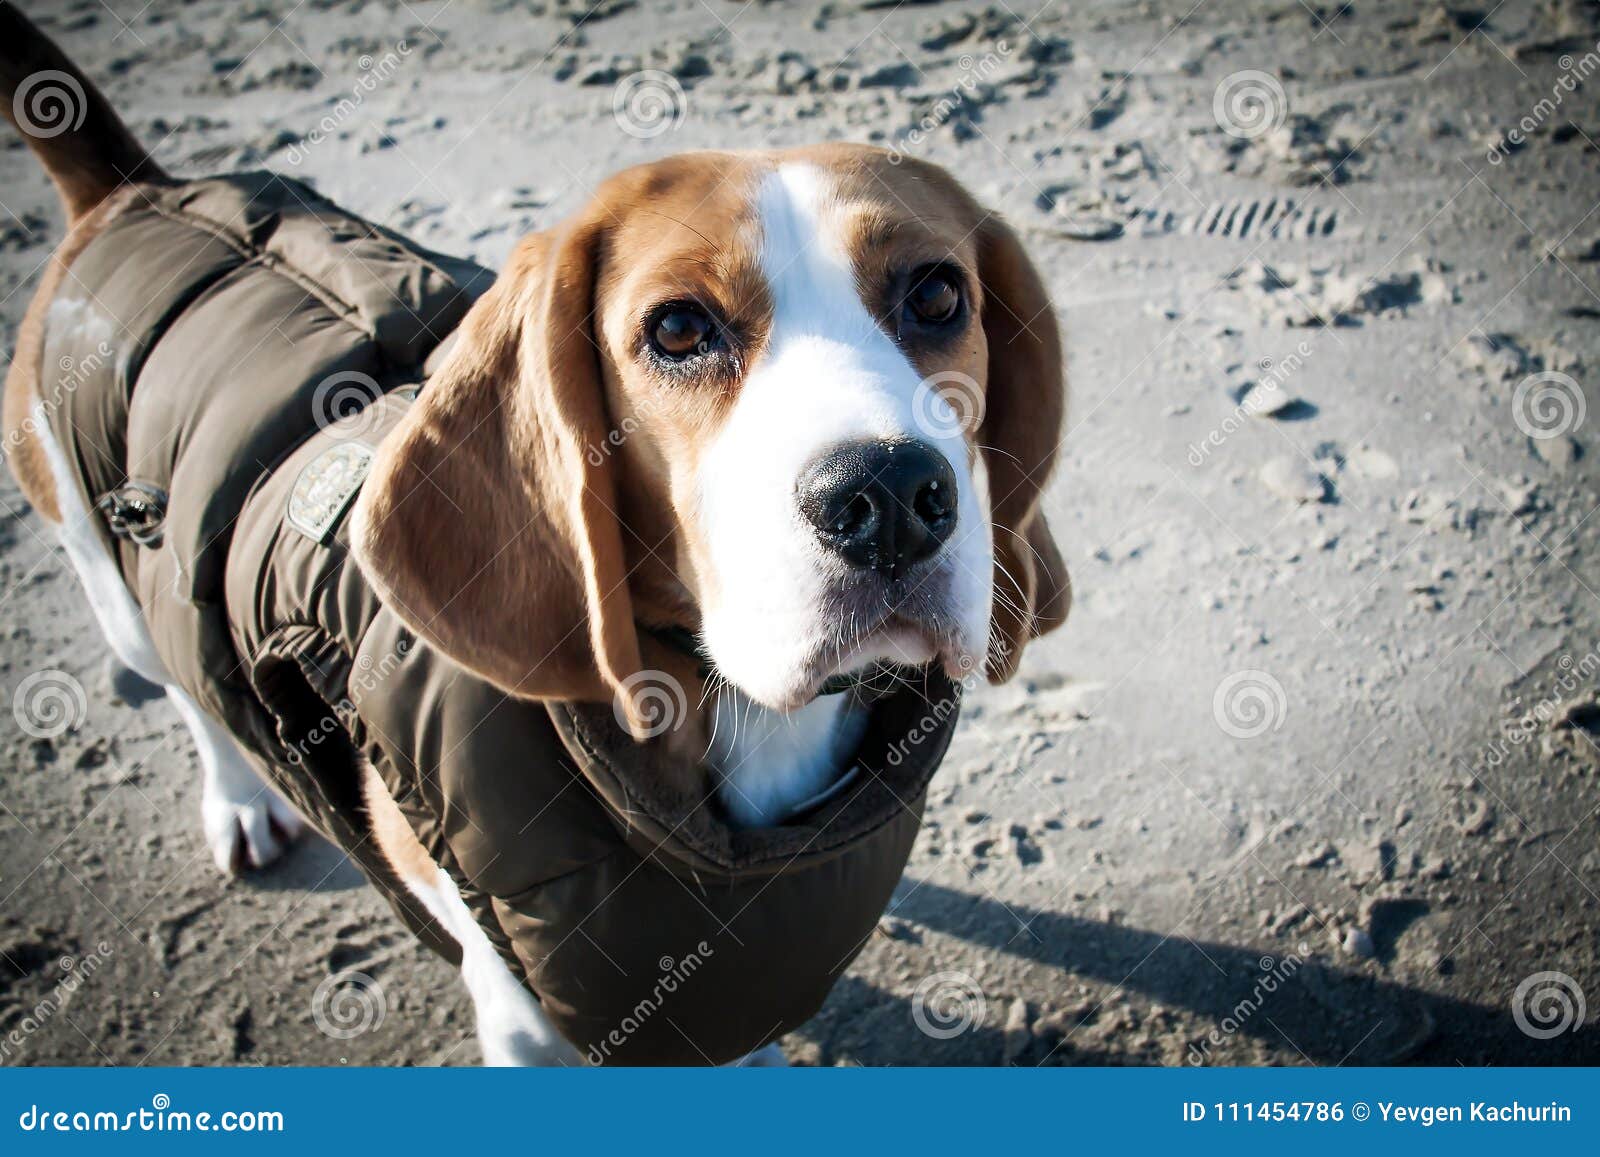 Dog Beagle in Winter Clothes Stock Image of nature, small: 111454786